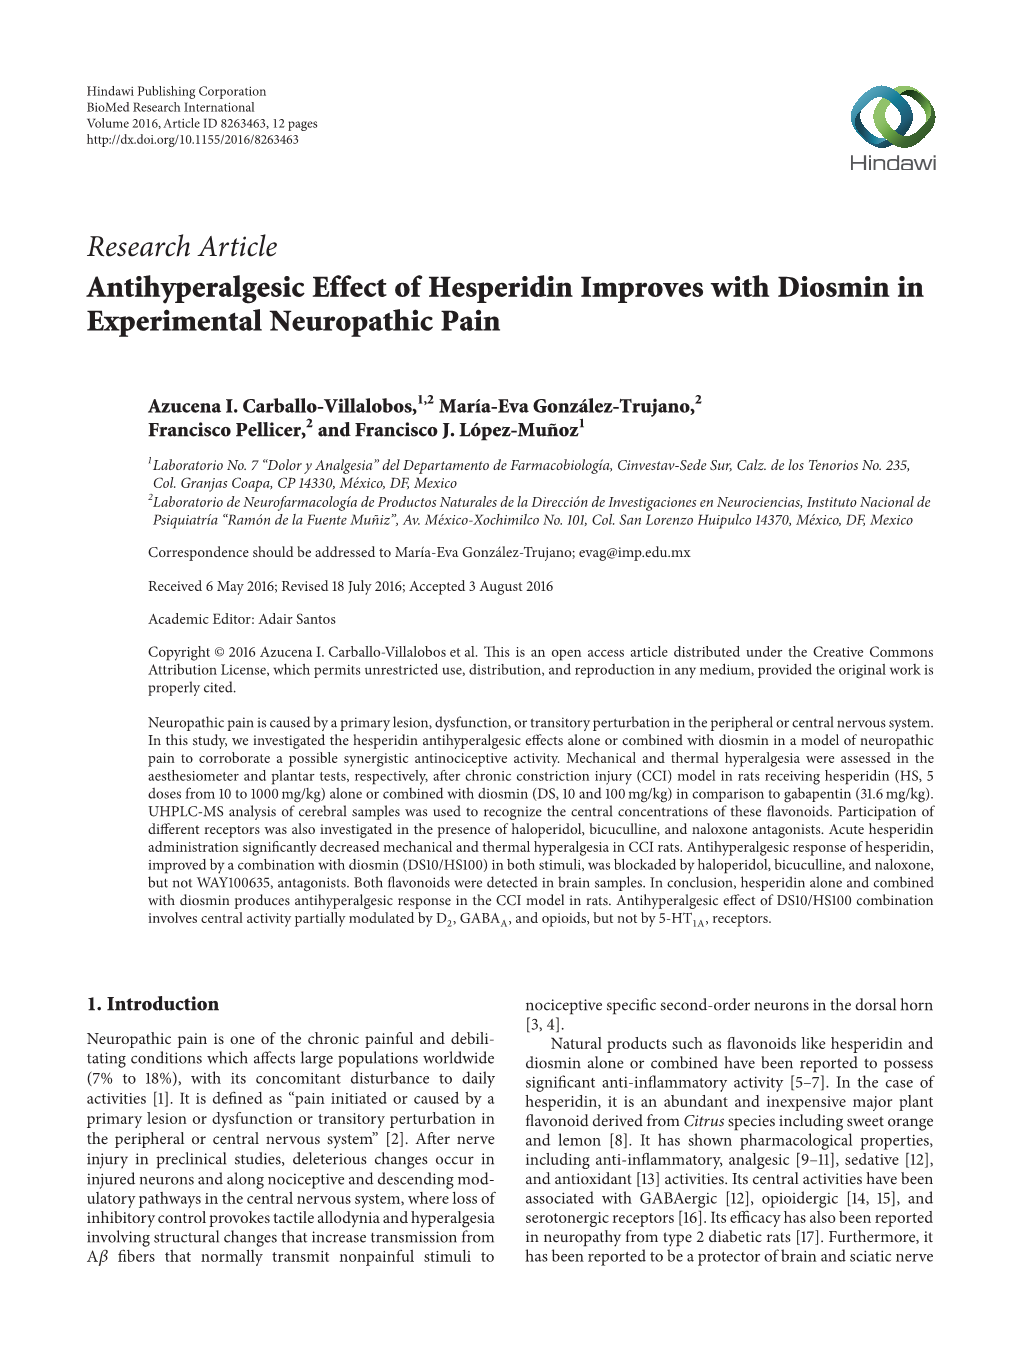 Antihyperalgesic Effect of Hesperidin Improves with Diosmin in Experimental Neuropathic Pain